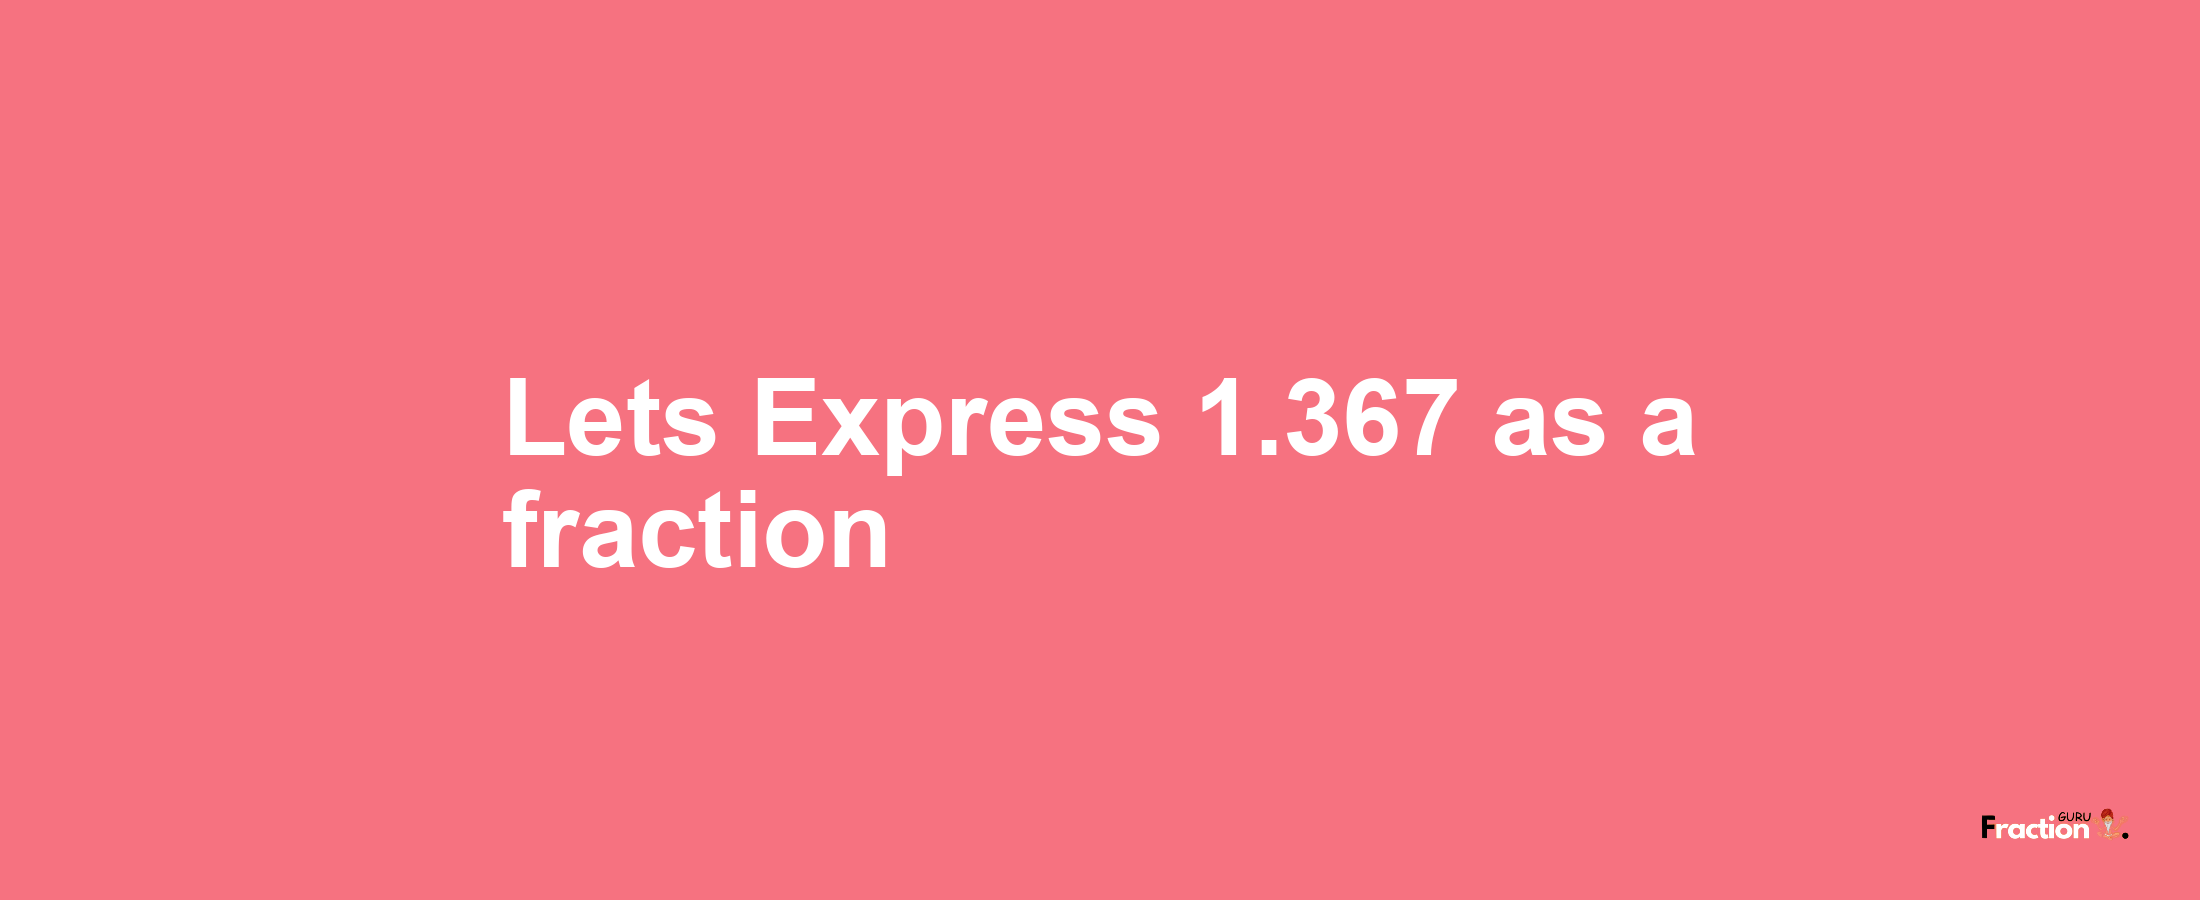 Lets Express 1.367 as afraction